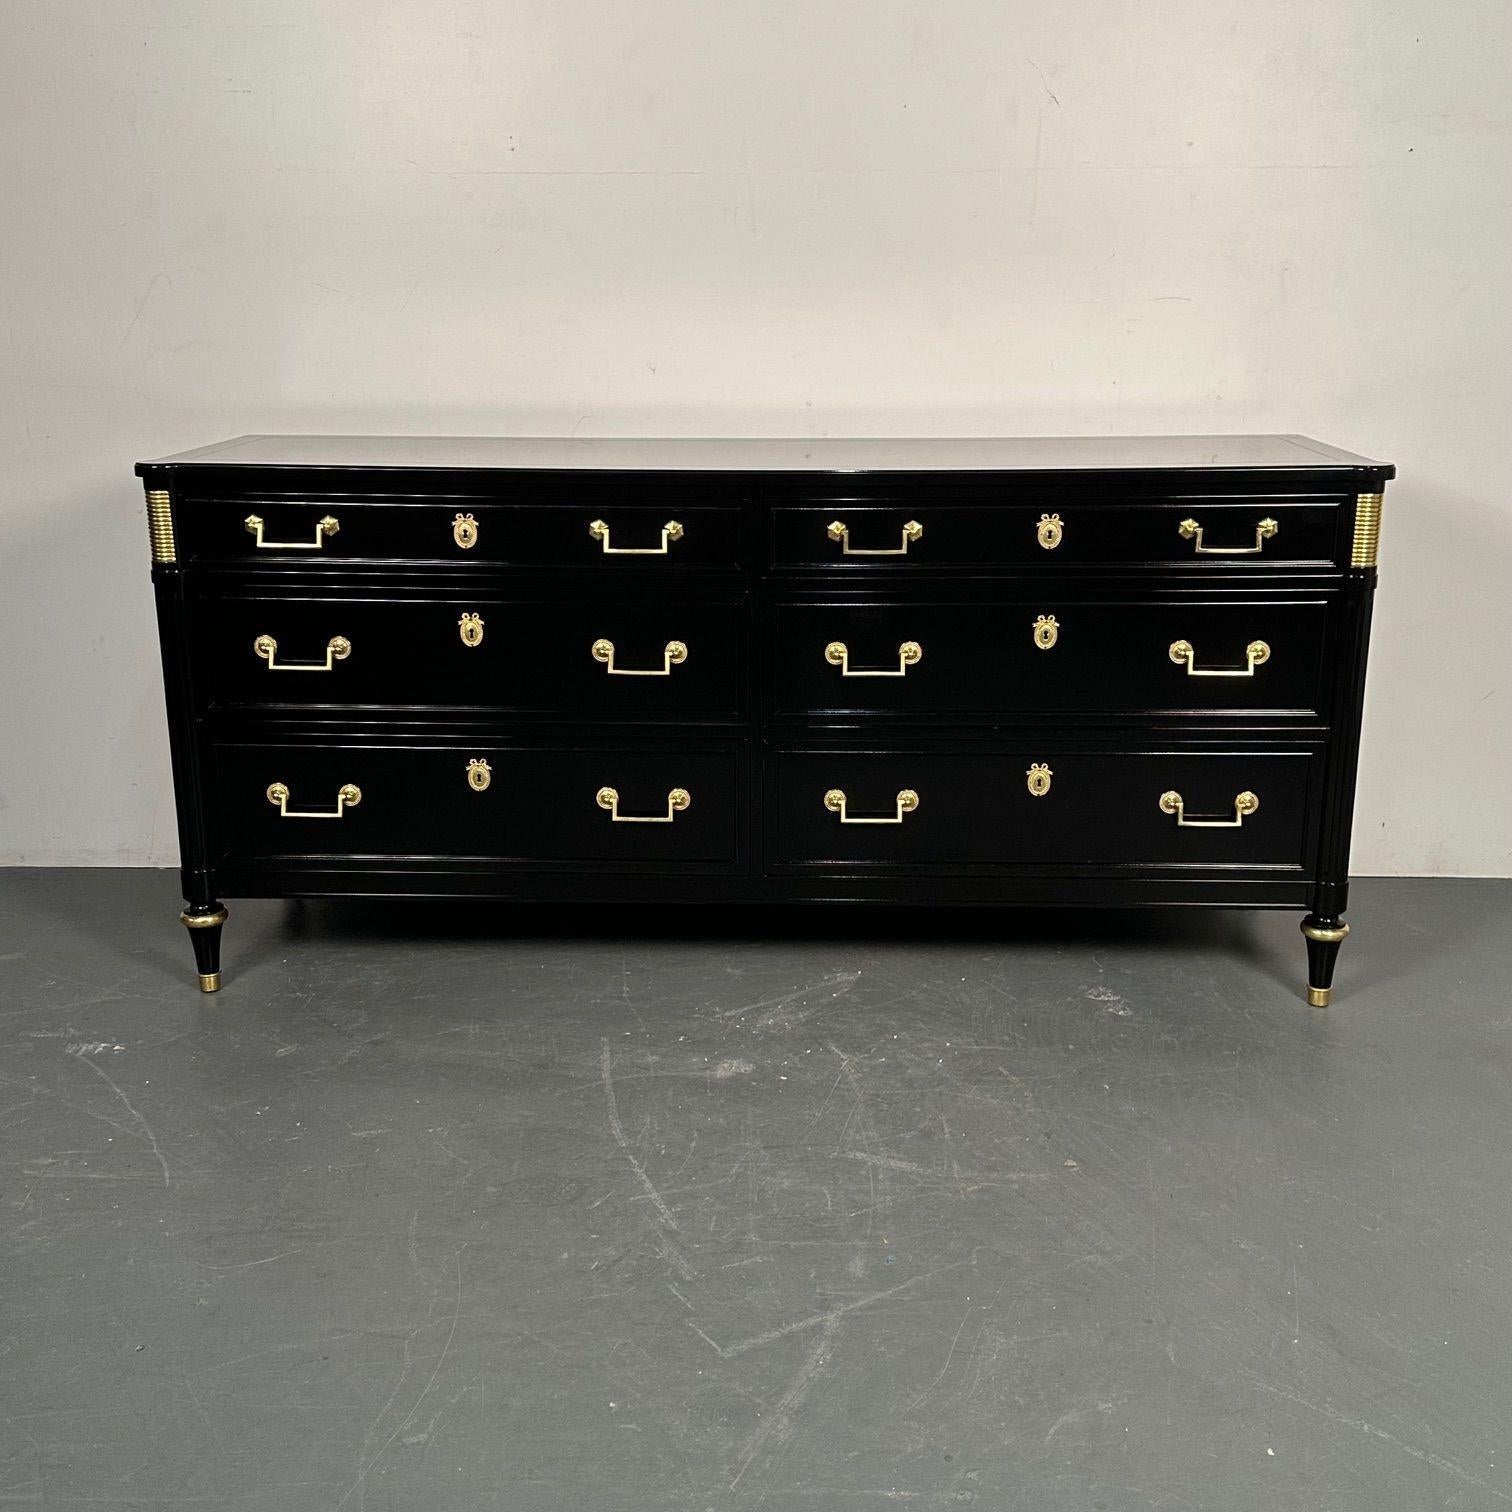 Hollywood Regency Louis XVI Style Dresser / Sideboard, Black Lacquer, Directoire

Directoire style dresser or sideboard having been fully refninished in a high gloss ebony lacquer. This piece having 6 drawers with square brass drawer pulls and louis